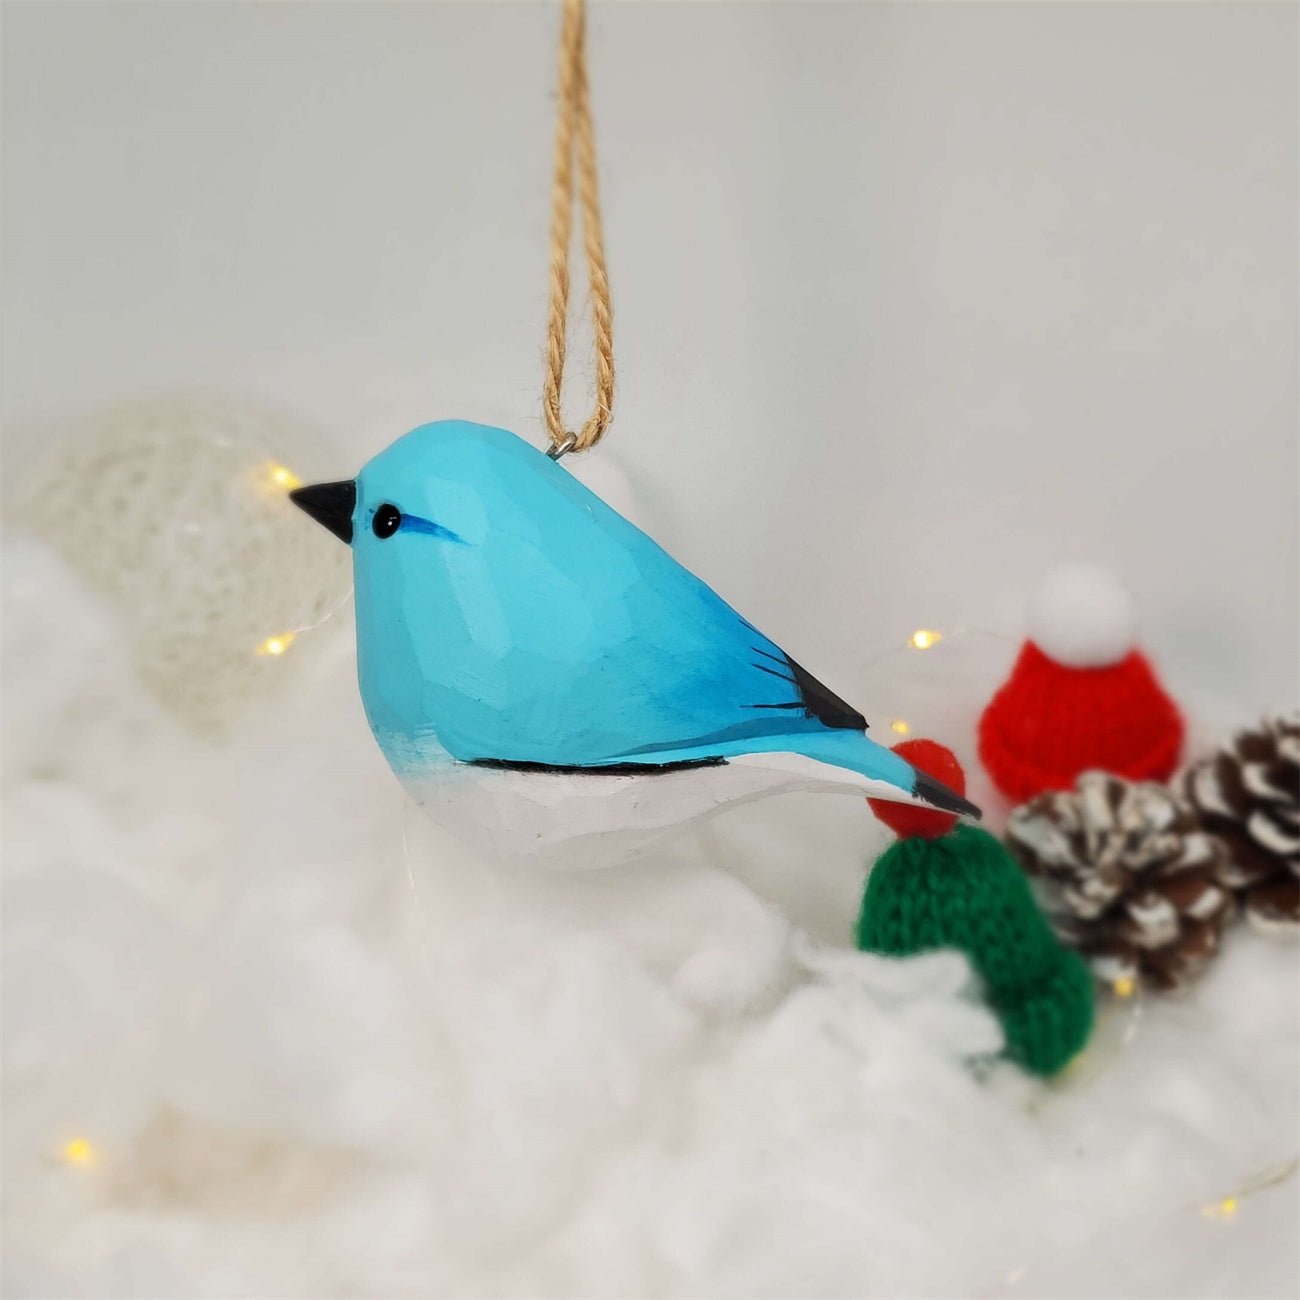 BlueBird-A Carved and Painted Wooden Bird Ornaments - PAINTED BIRD SHOP